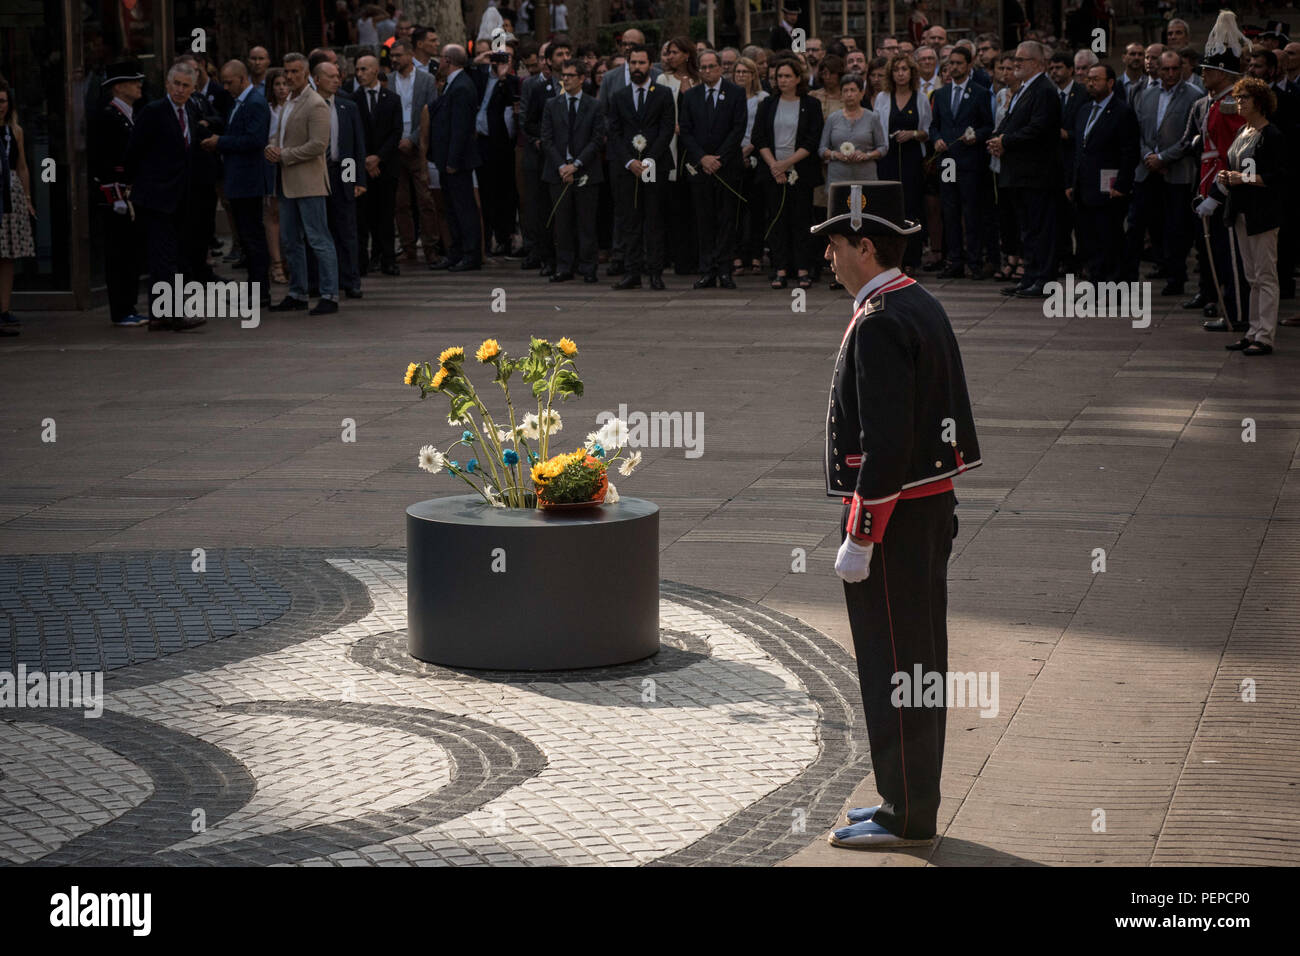 Barcelona, Catalonia, Spain. 17th Aug, 2018. Local authorities pay tribute in Las Ramblas of Barcelona after one year of the terror attacks that killed 16 people and injured more than 120 when two vehicles crashed into the crowds. Credit: Jordi Boixareu/ZUMA Wire/Alamy Live News Stock Photo